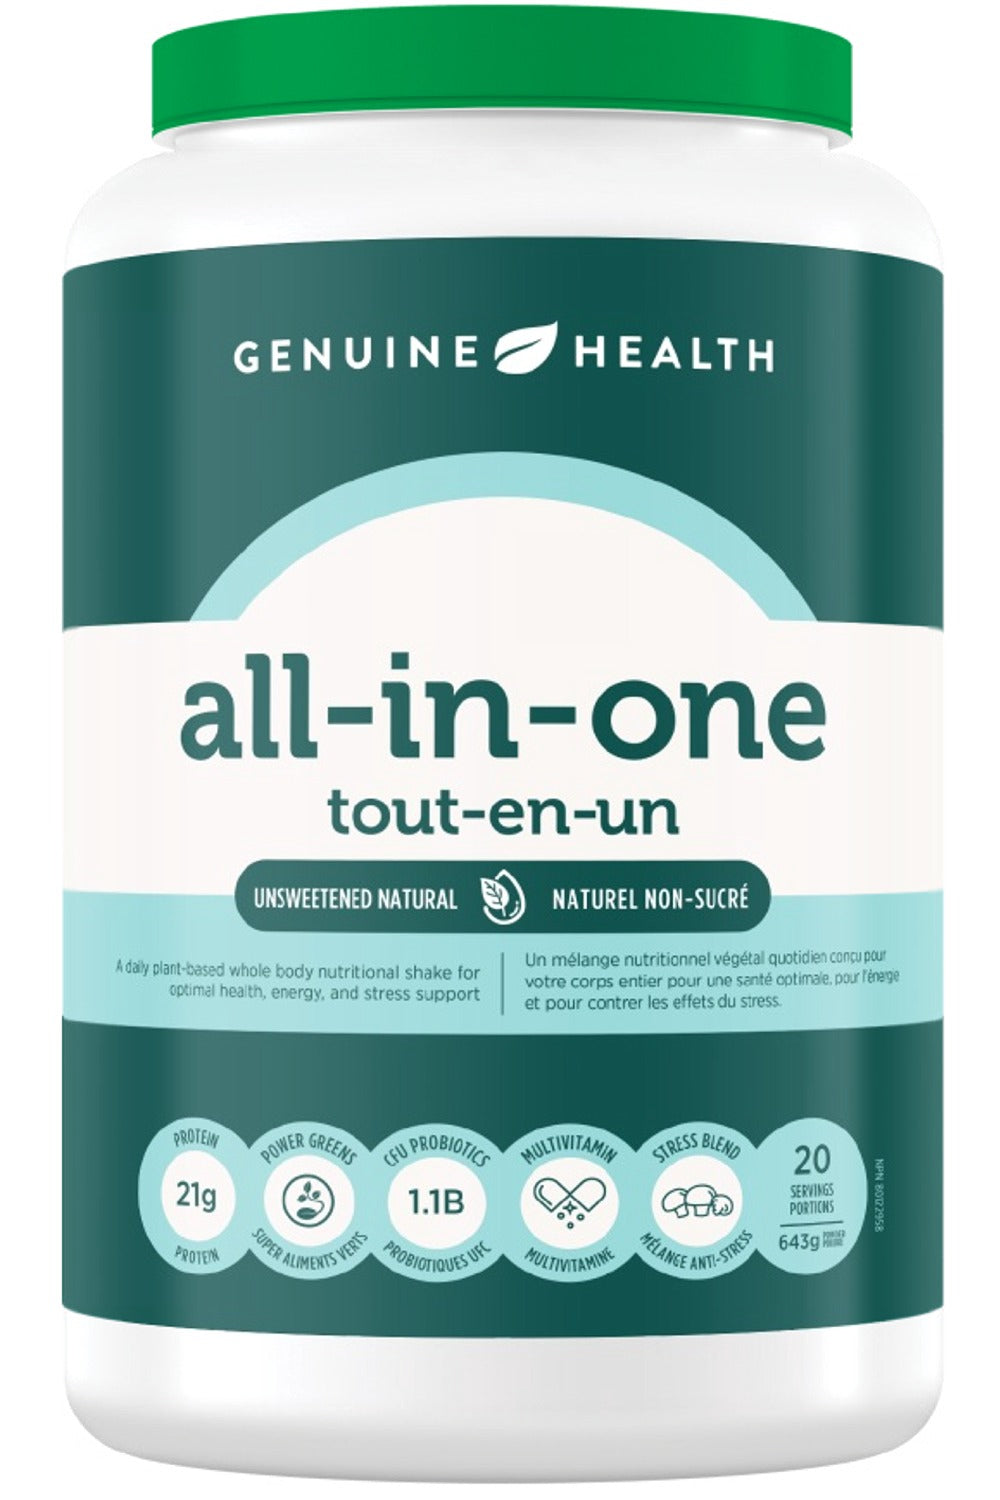 GENUINE HEALTH Fermented Vegan all-in-one (Unsweetened Natural - 20 Servings)